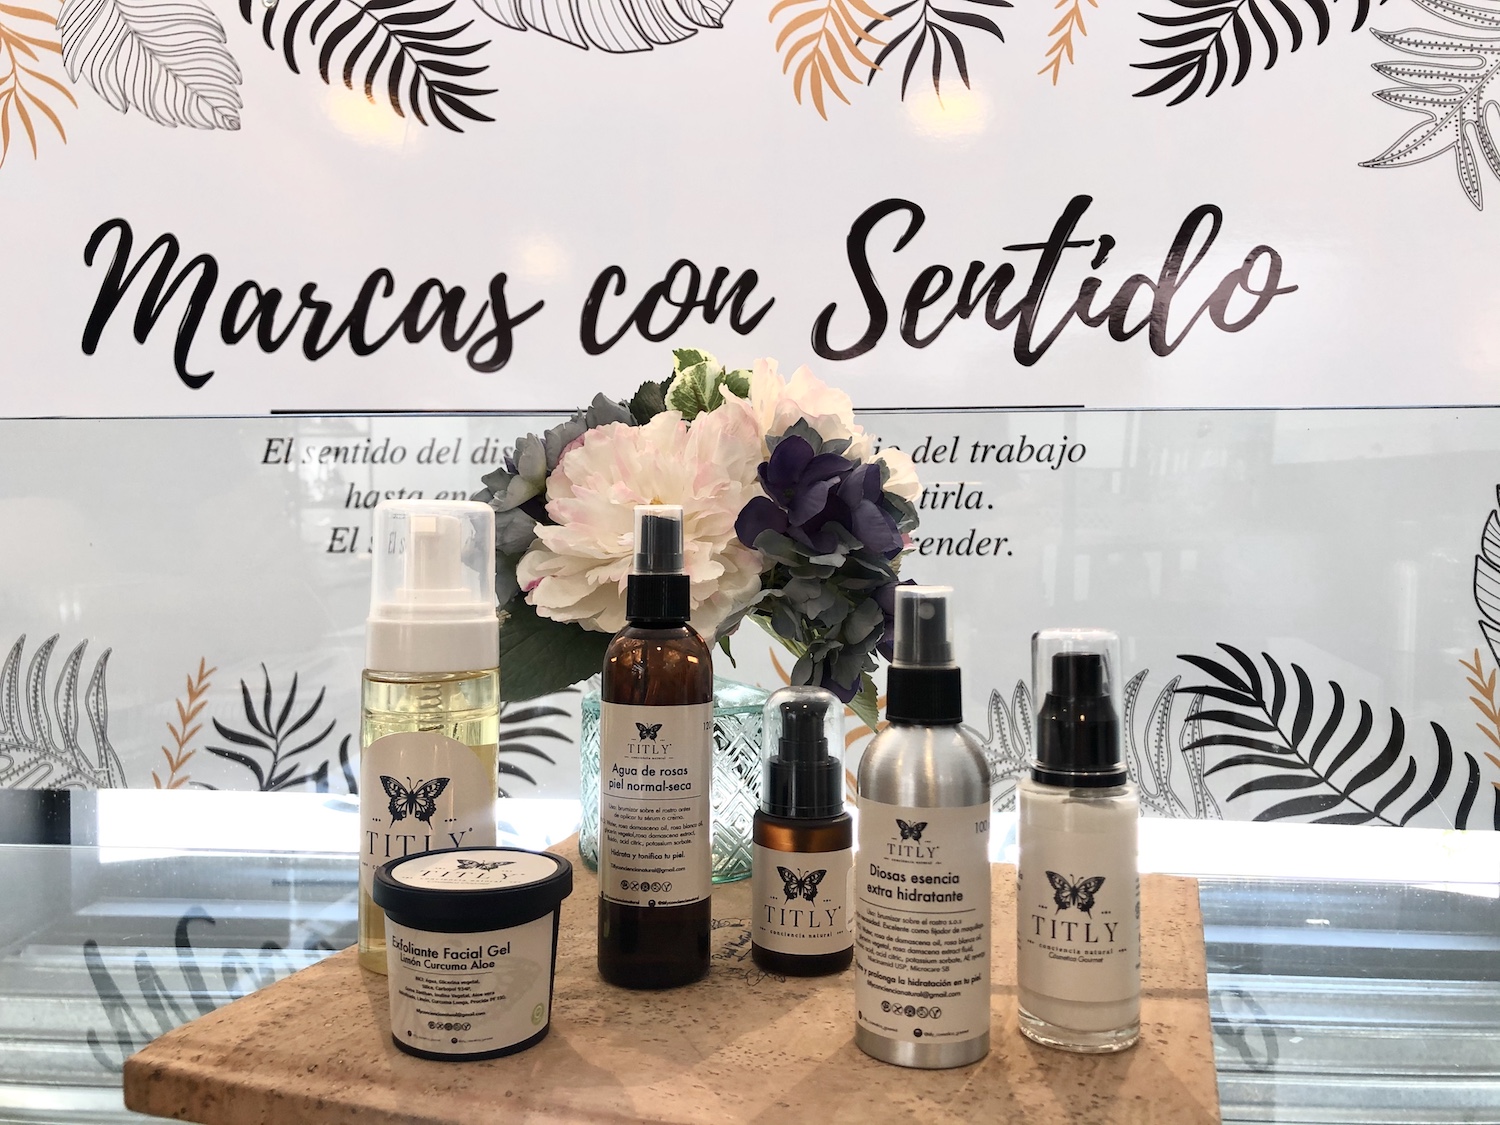 TITLY: COSMÉTICA COMESTIBLE